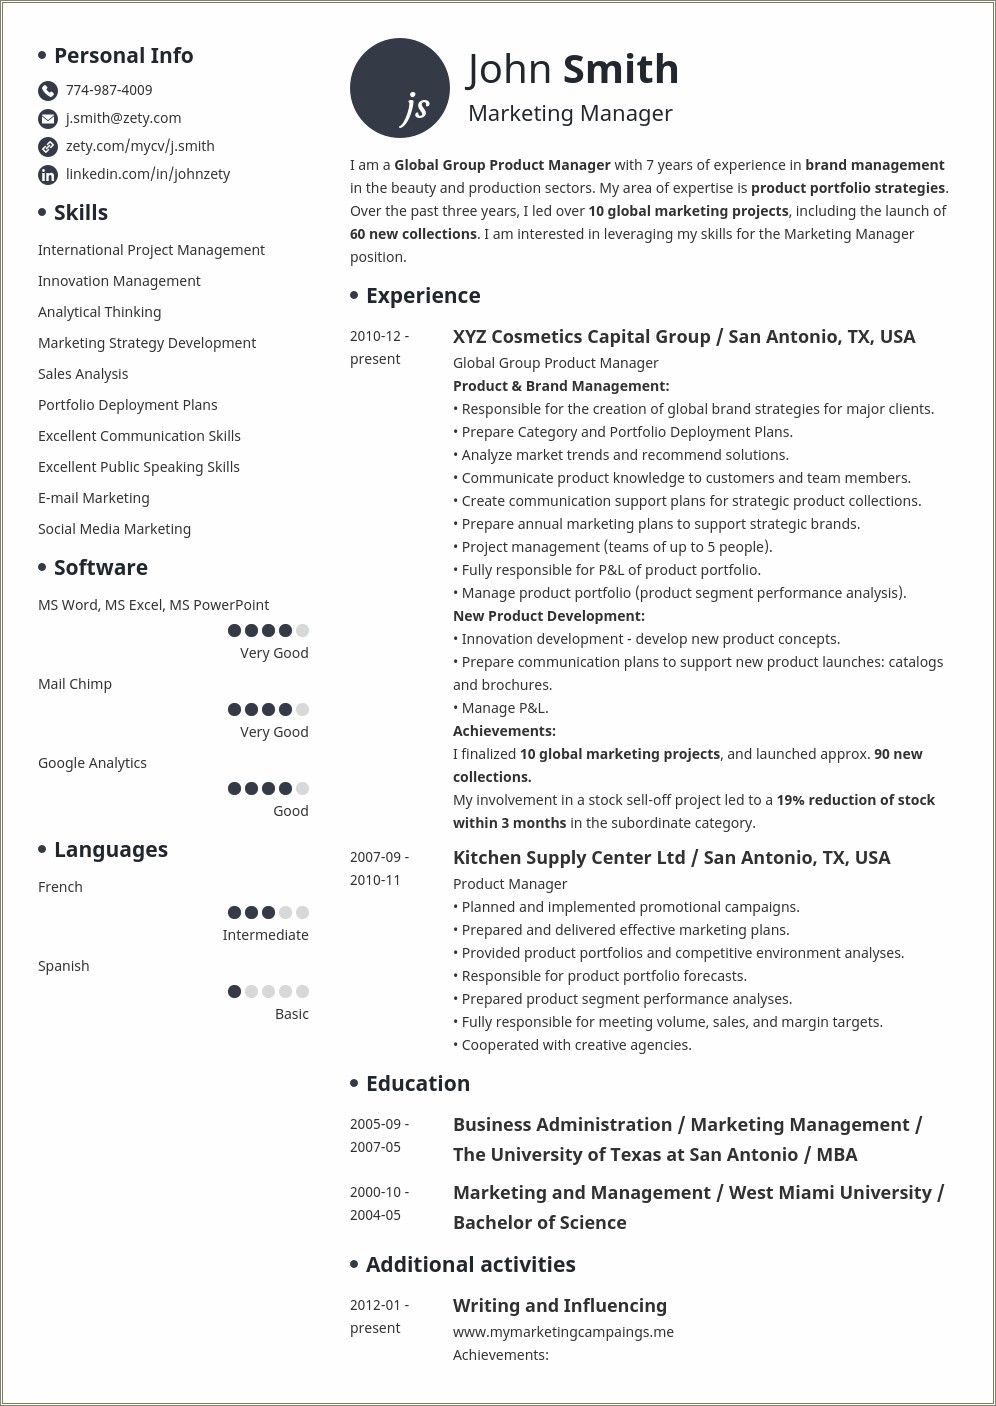 Just Education And Experience In Resume